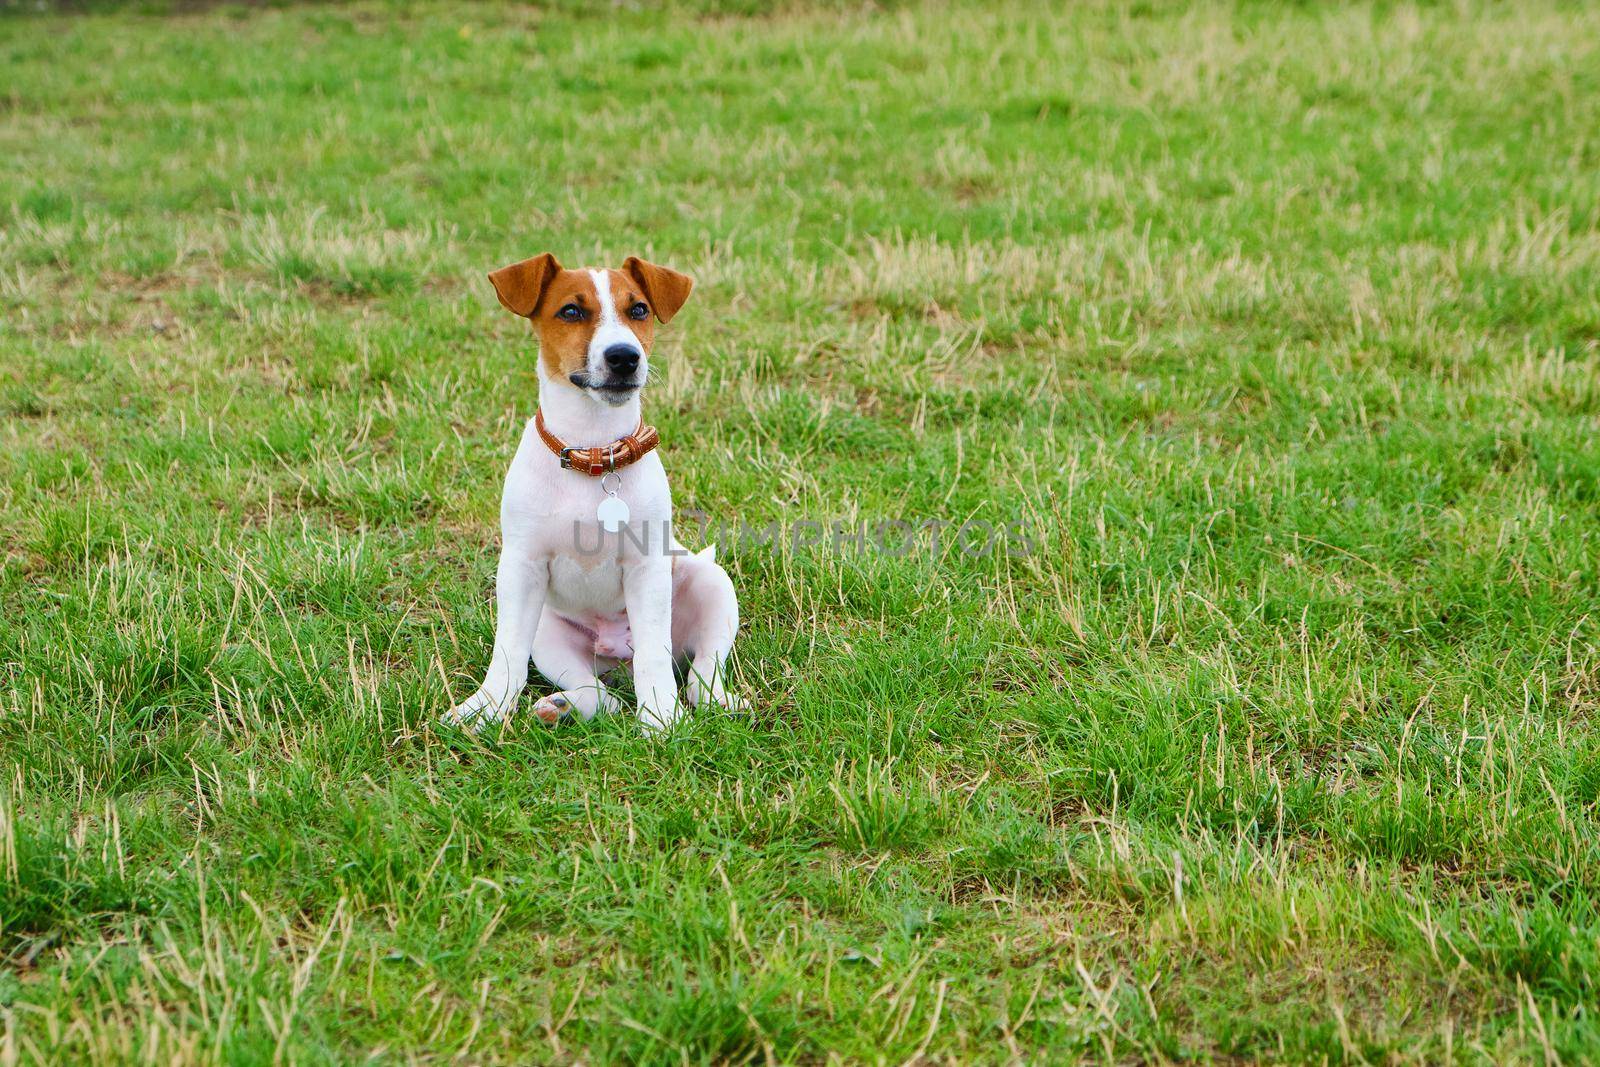 little puppy of a jack russel terrier in a beautiful green meadow is sitting. Cute dog and good friend. Copyspace for ad, design.